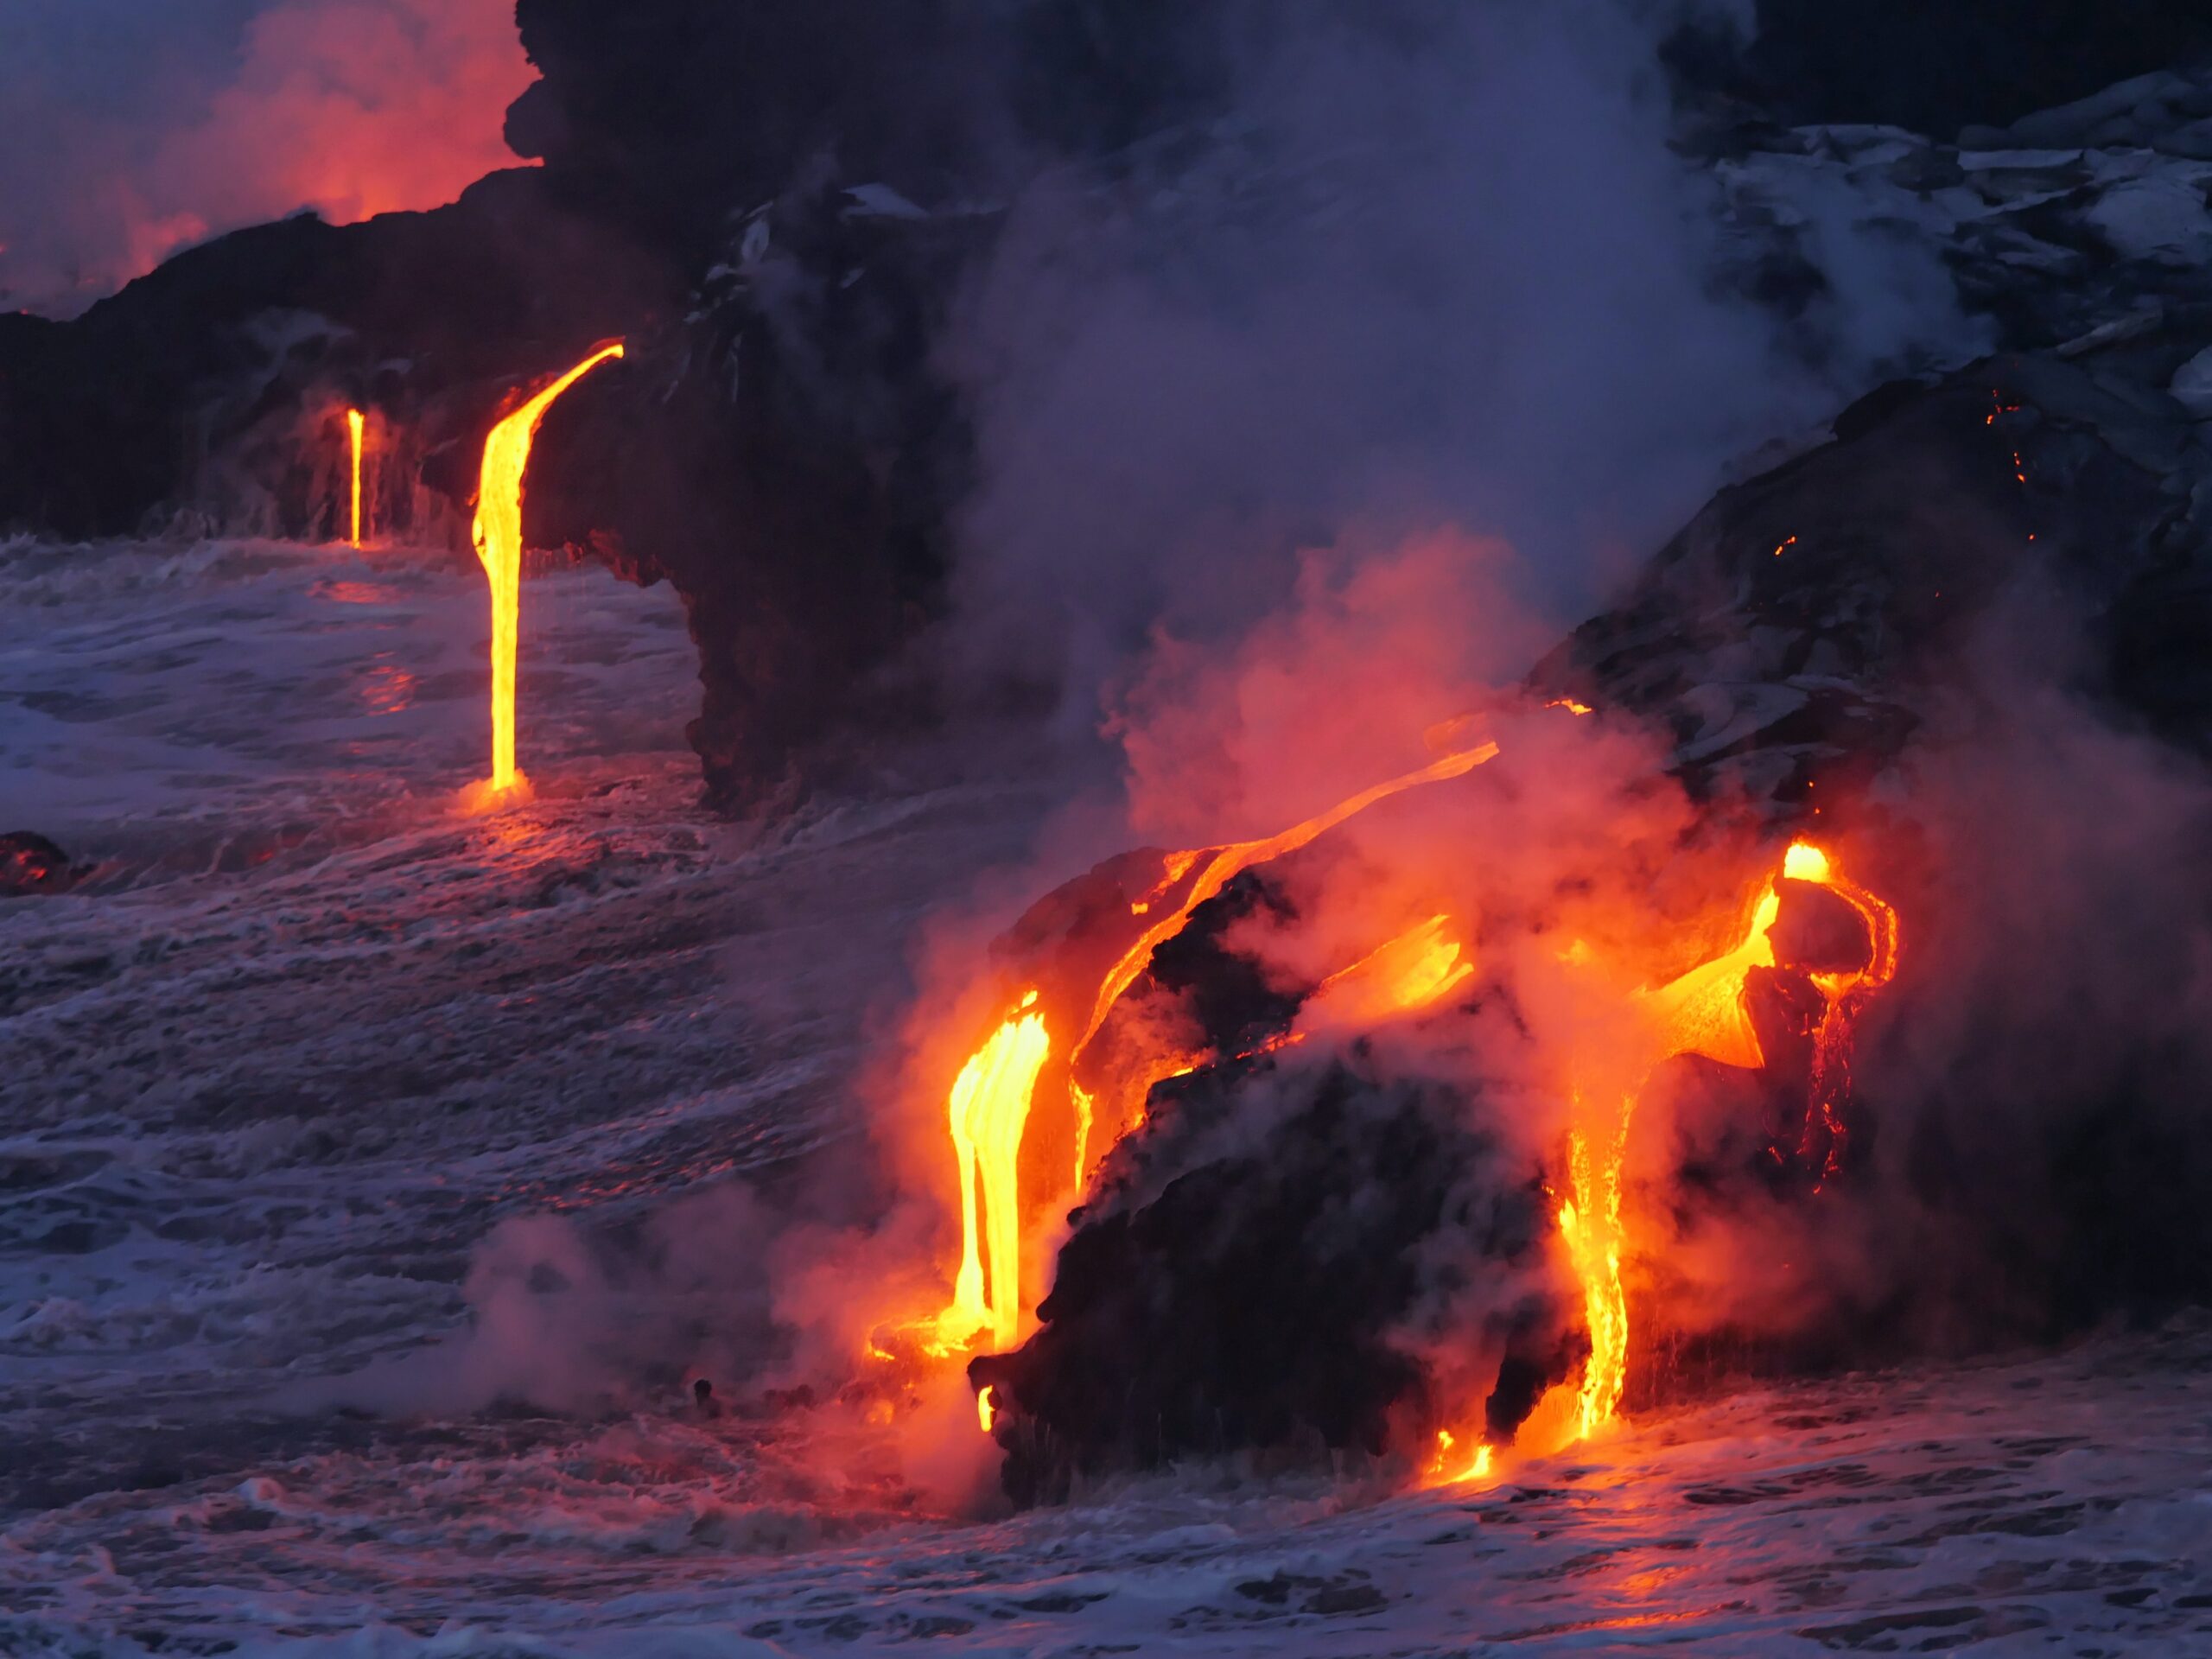 One of the greatest hidden gems in Hawaii is seeing lava flowing into the ocean.